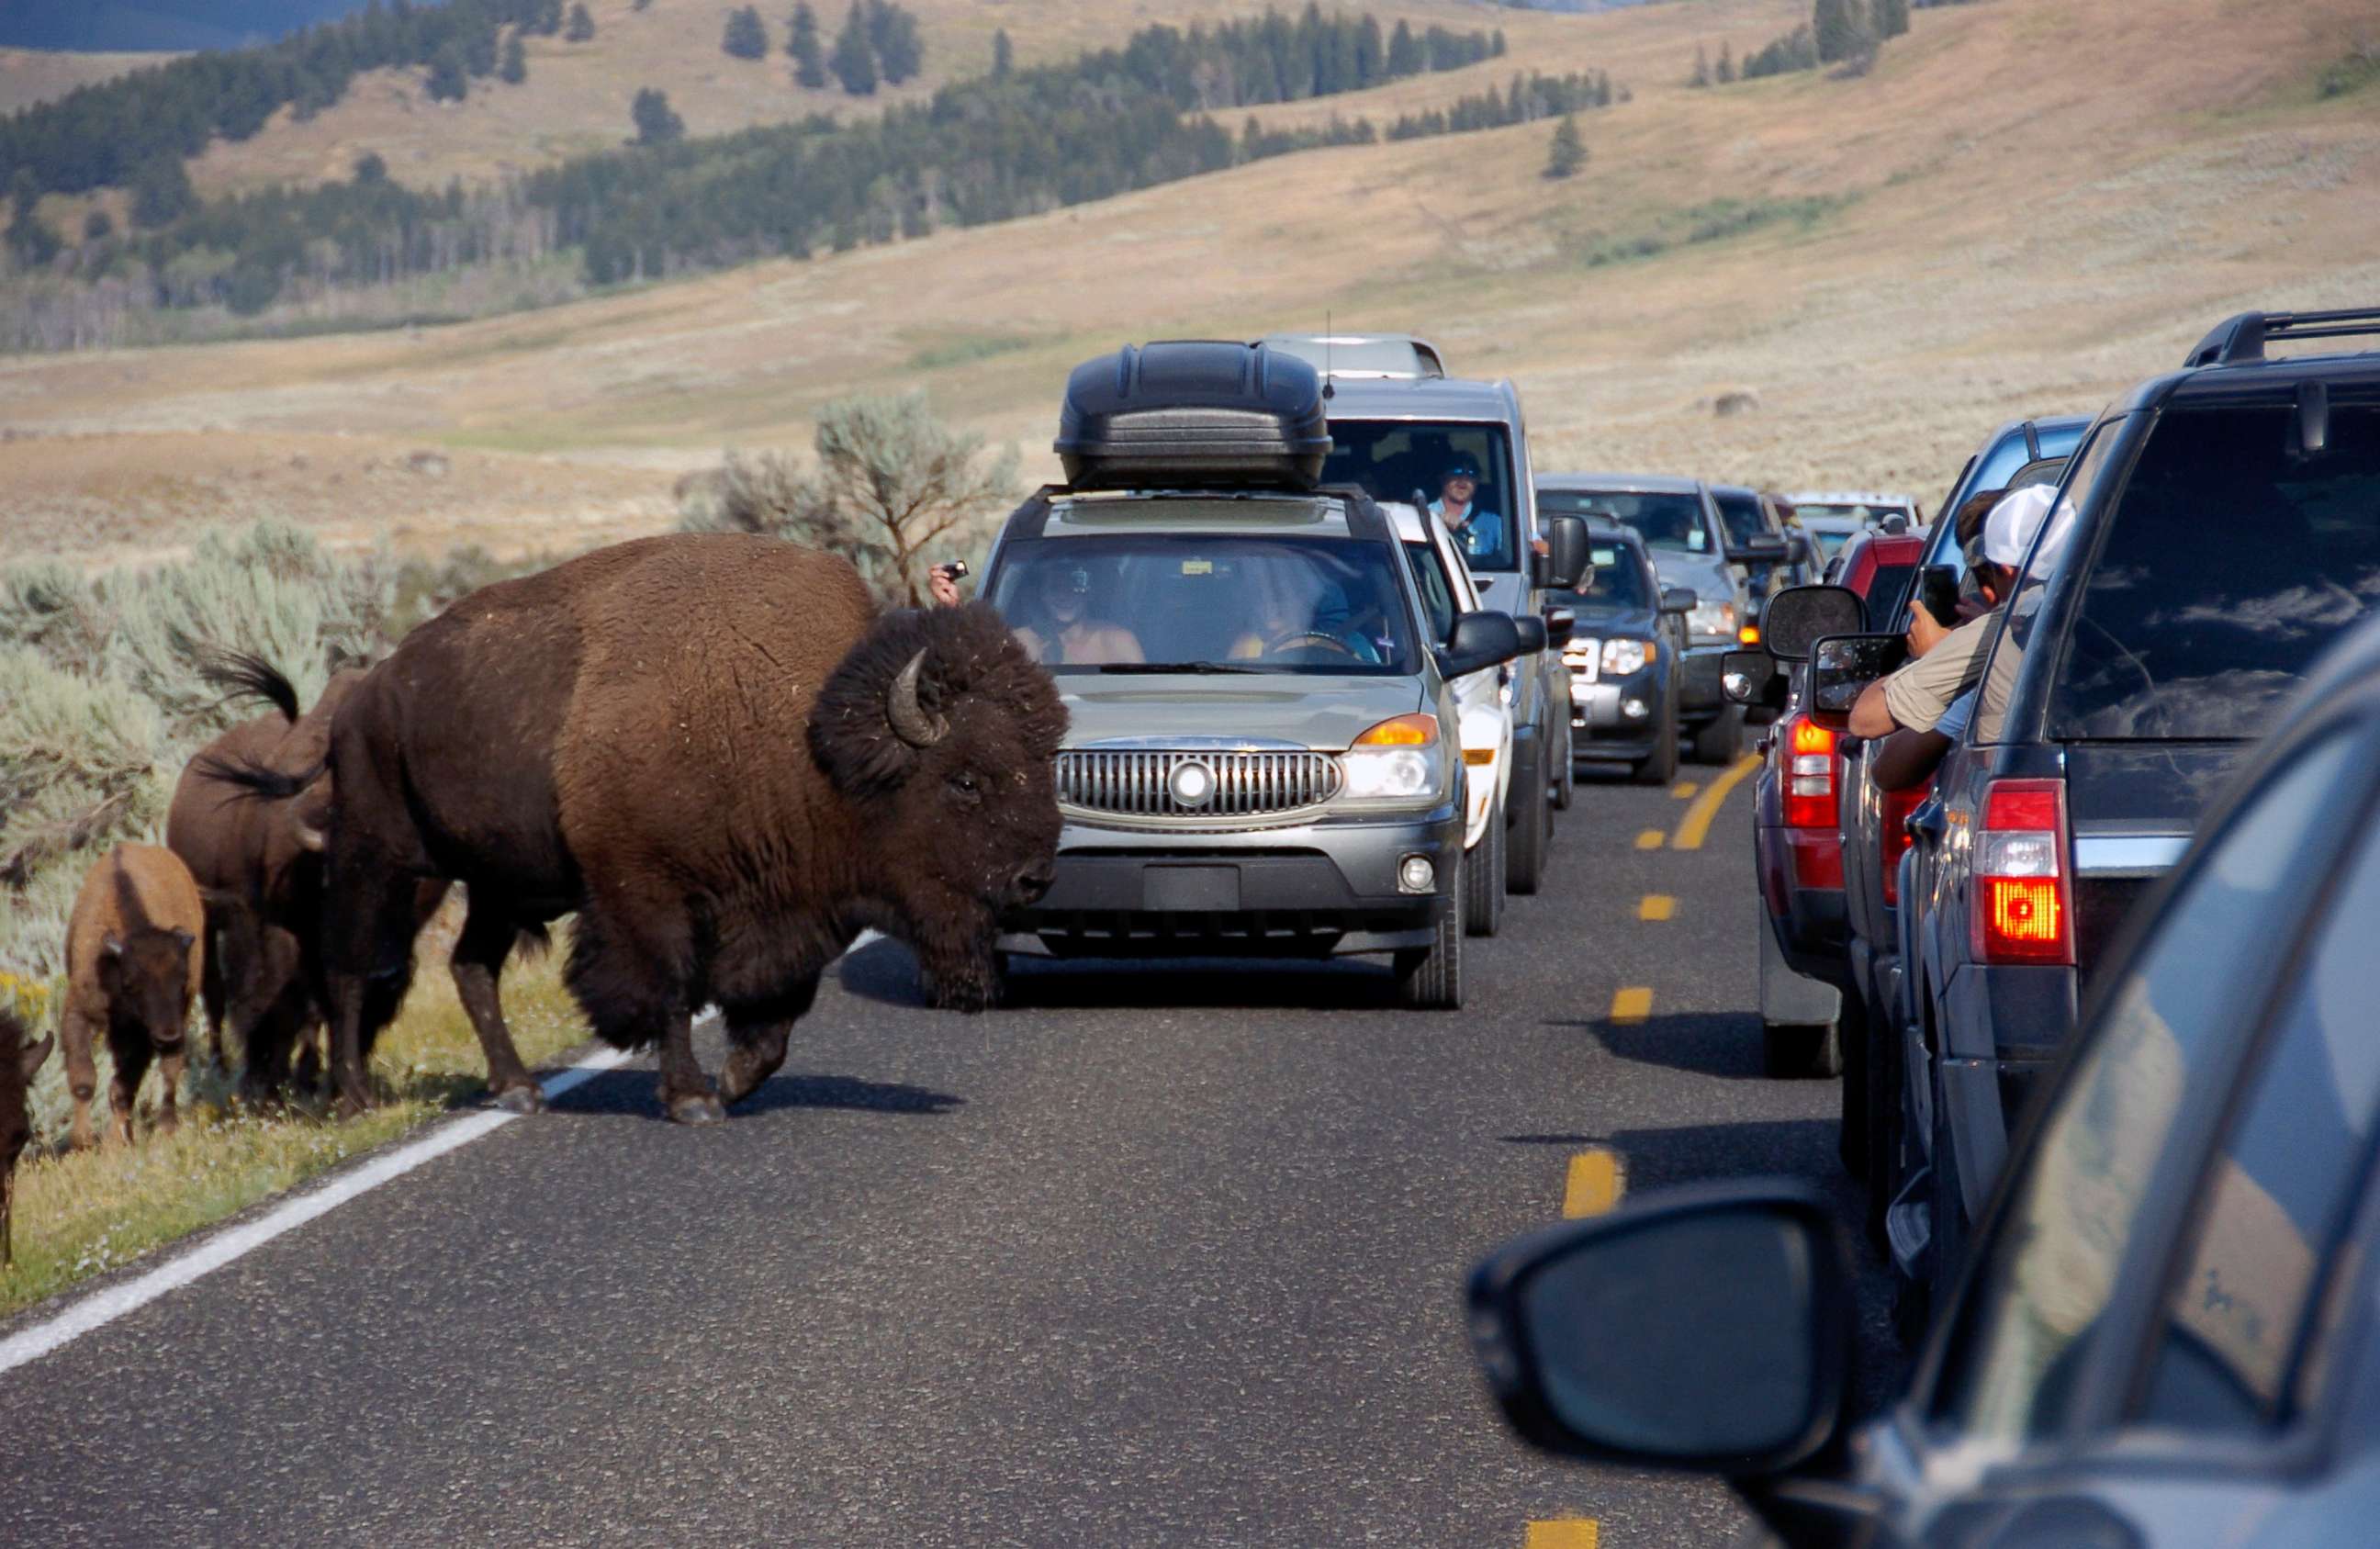 PHOTO: A large bison blocks traffic as tourists take photos in the Lamar Valley of Yellowstone National Park in Wyoming, Aug. 3, 2016.